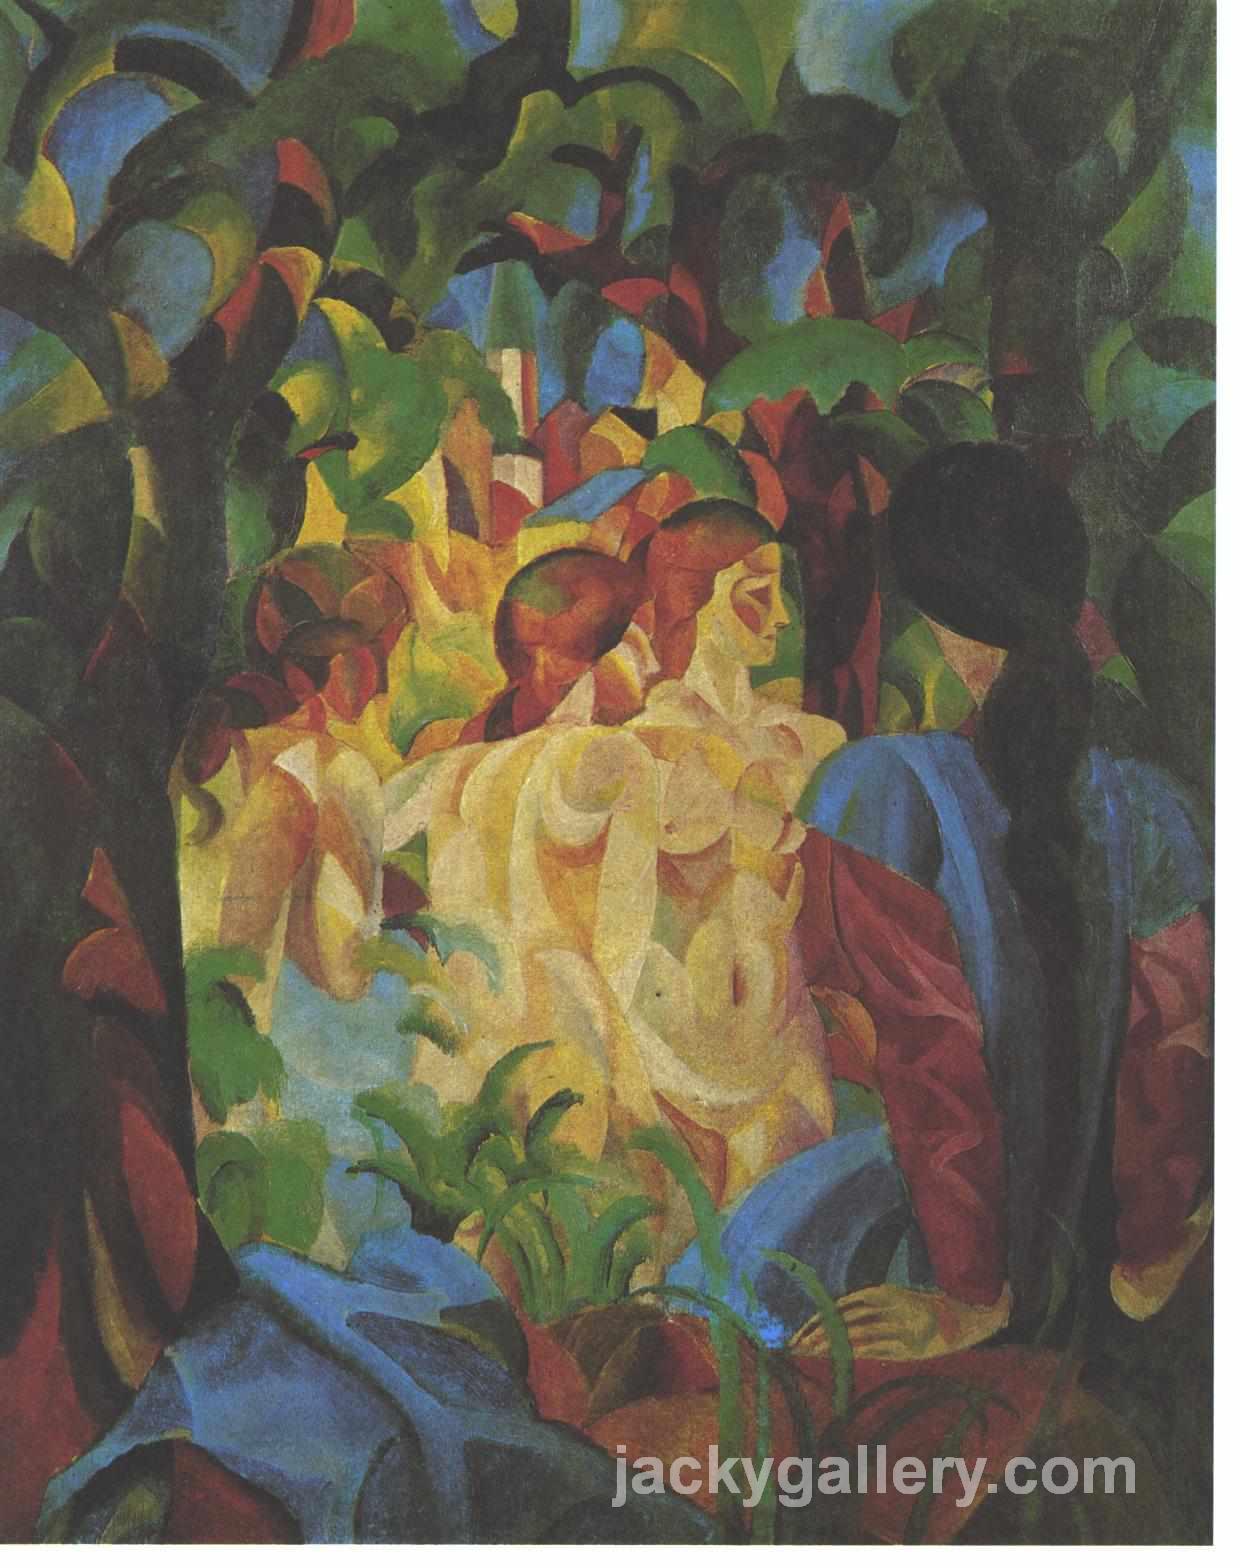 Bathing girls with town in the backgraund, August Macke painting